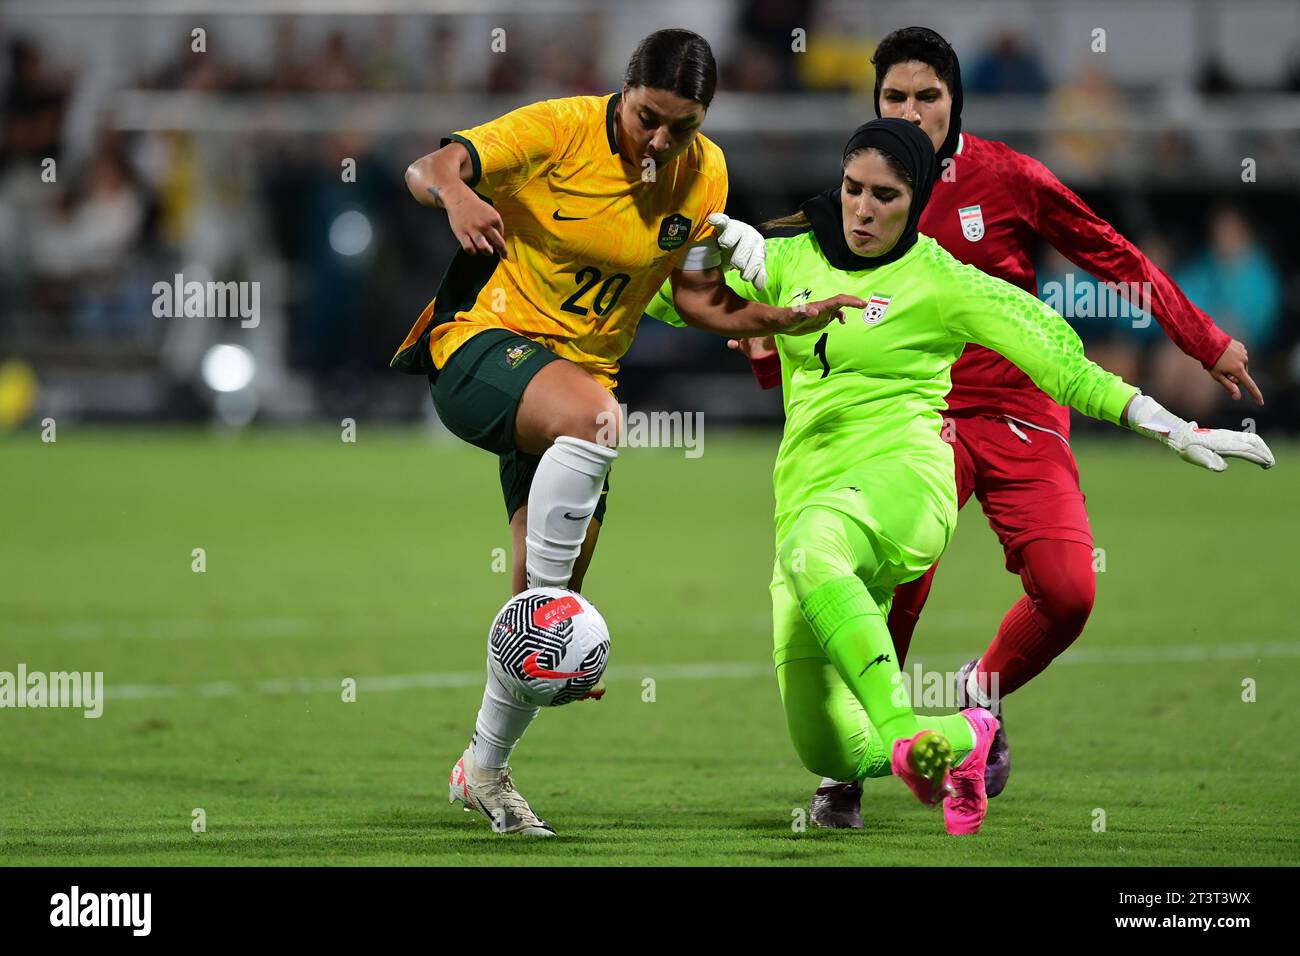 Perth, Australia. 26th Oct, 2023. Samantha May Kerr (L) of the Australia women's football team and Zahra Khajavi (R) of the Islamic Republic of Iran women's football team are seen in action during the 2024 AFC Women's football Olympic Qualifying Round 2 Group A match between Australia and Islamic Republic of Iran held at the Perth Rectangular Stadium. Final score Australia 2:0 Islamic Republic of Iran. Credit: SOPA Images Limited/Alamy Live News Stock Photo